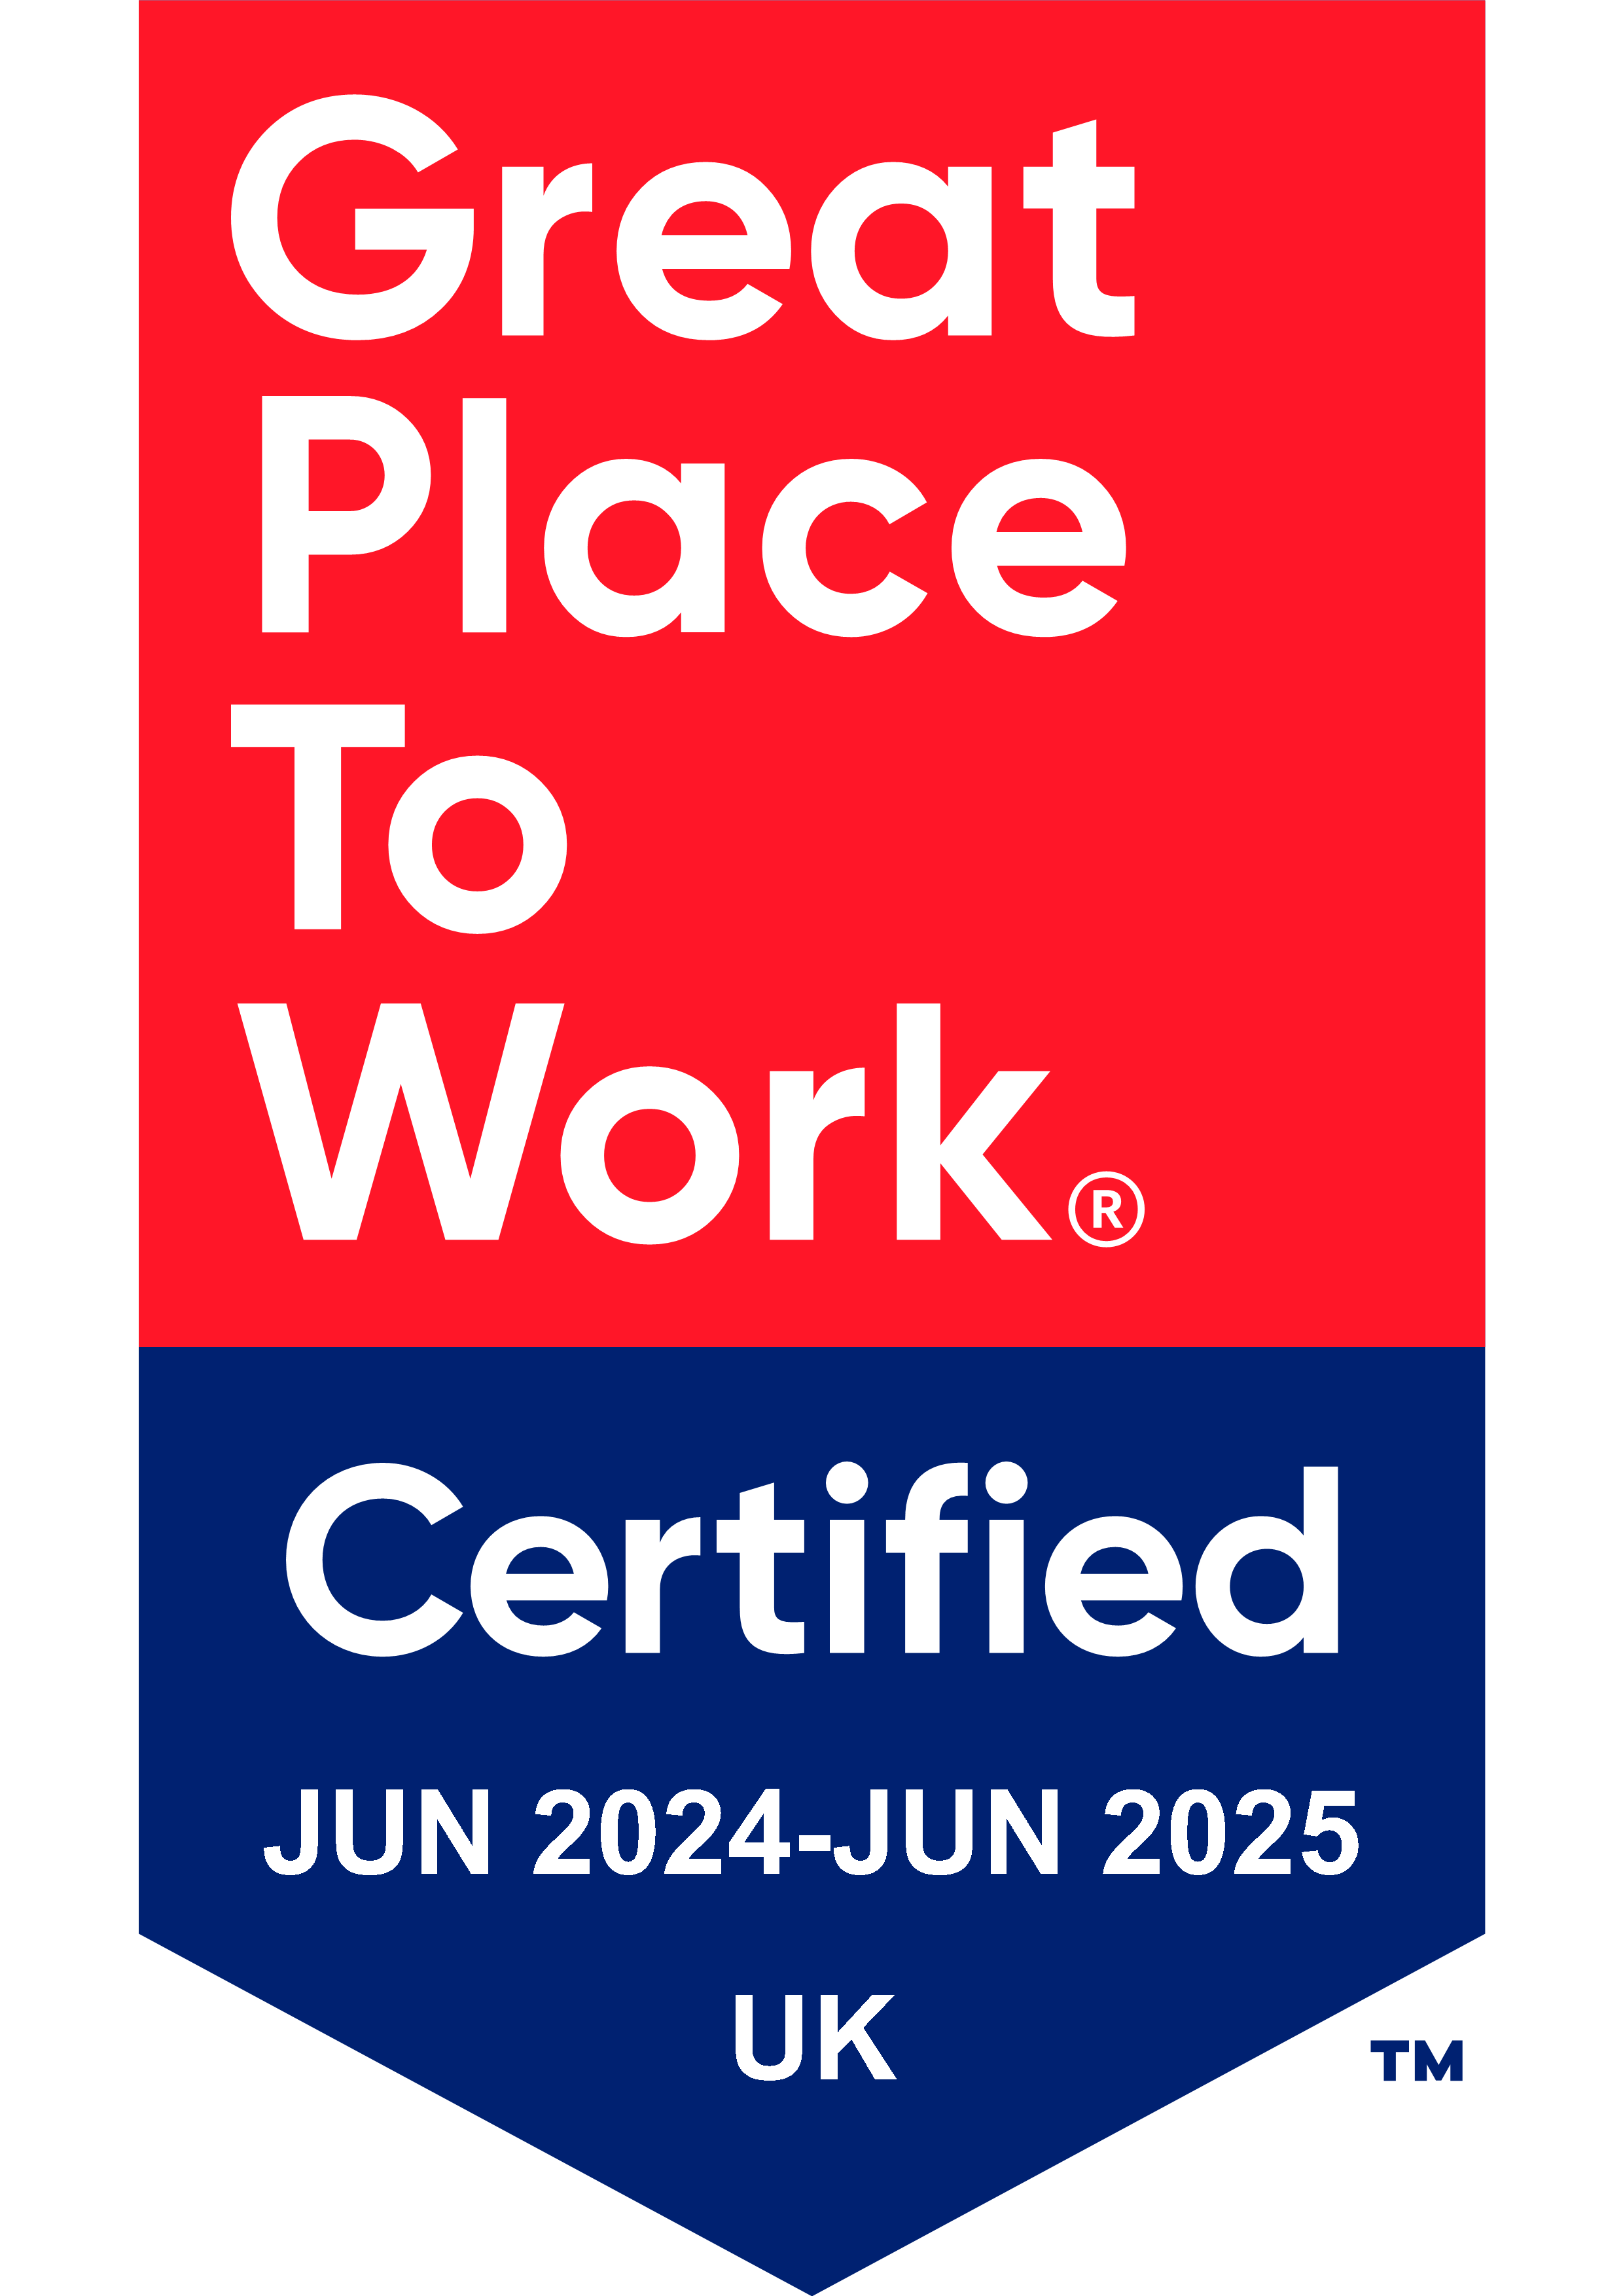 Great place to work - Certified June 2024 to June 2025 - UK